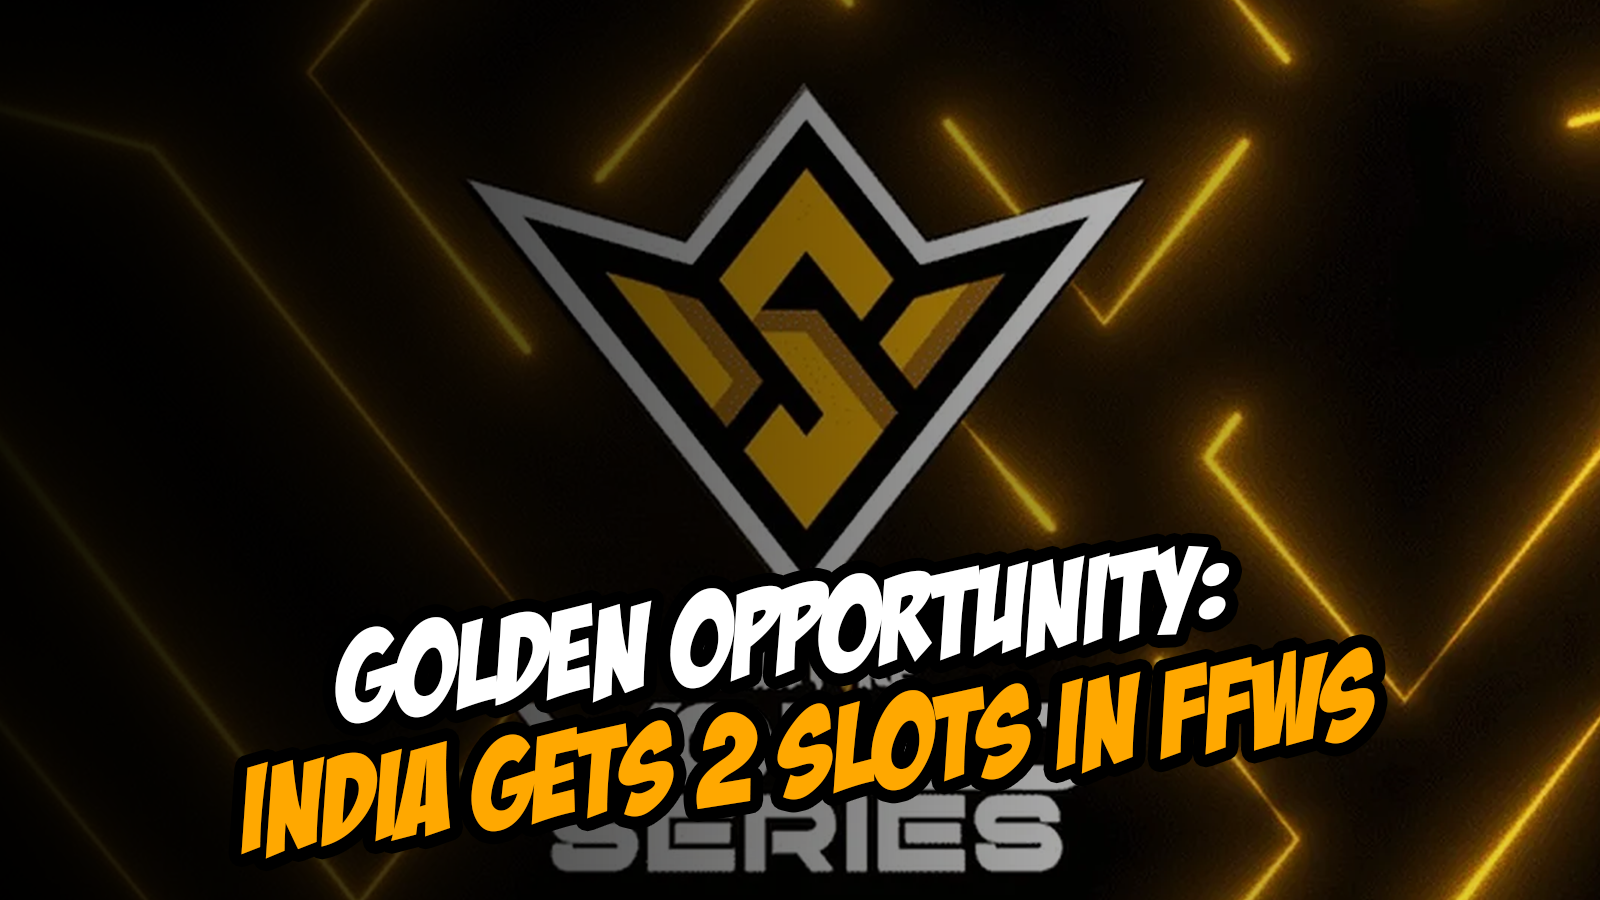 2 Slots for India Allocated in FFWS: A Golden Opportunity for Indian Gamers 